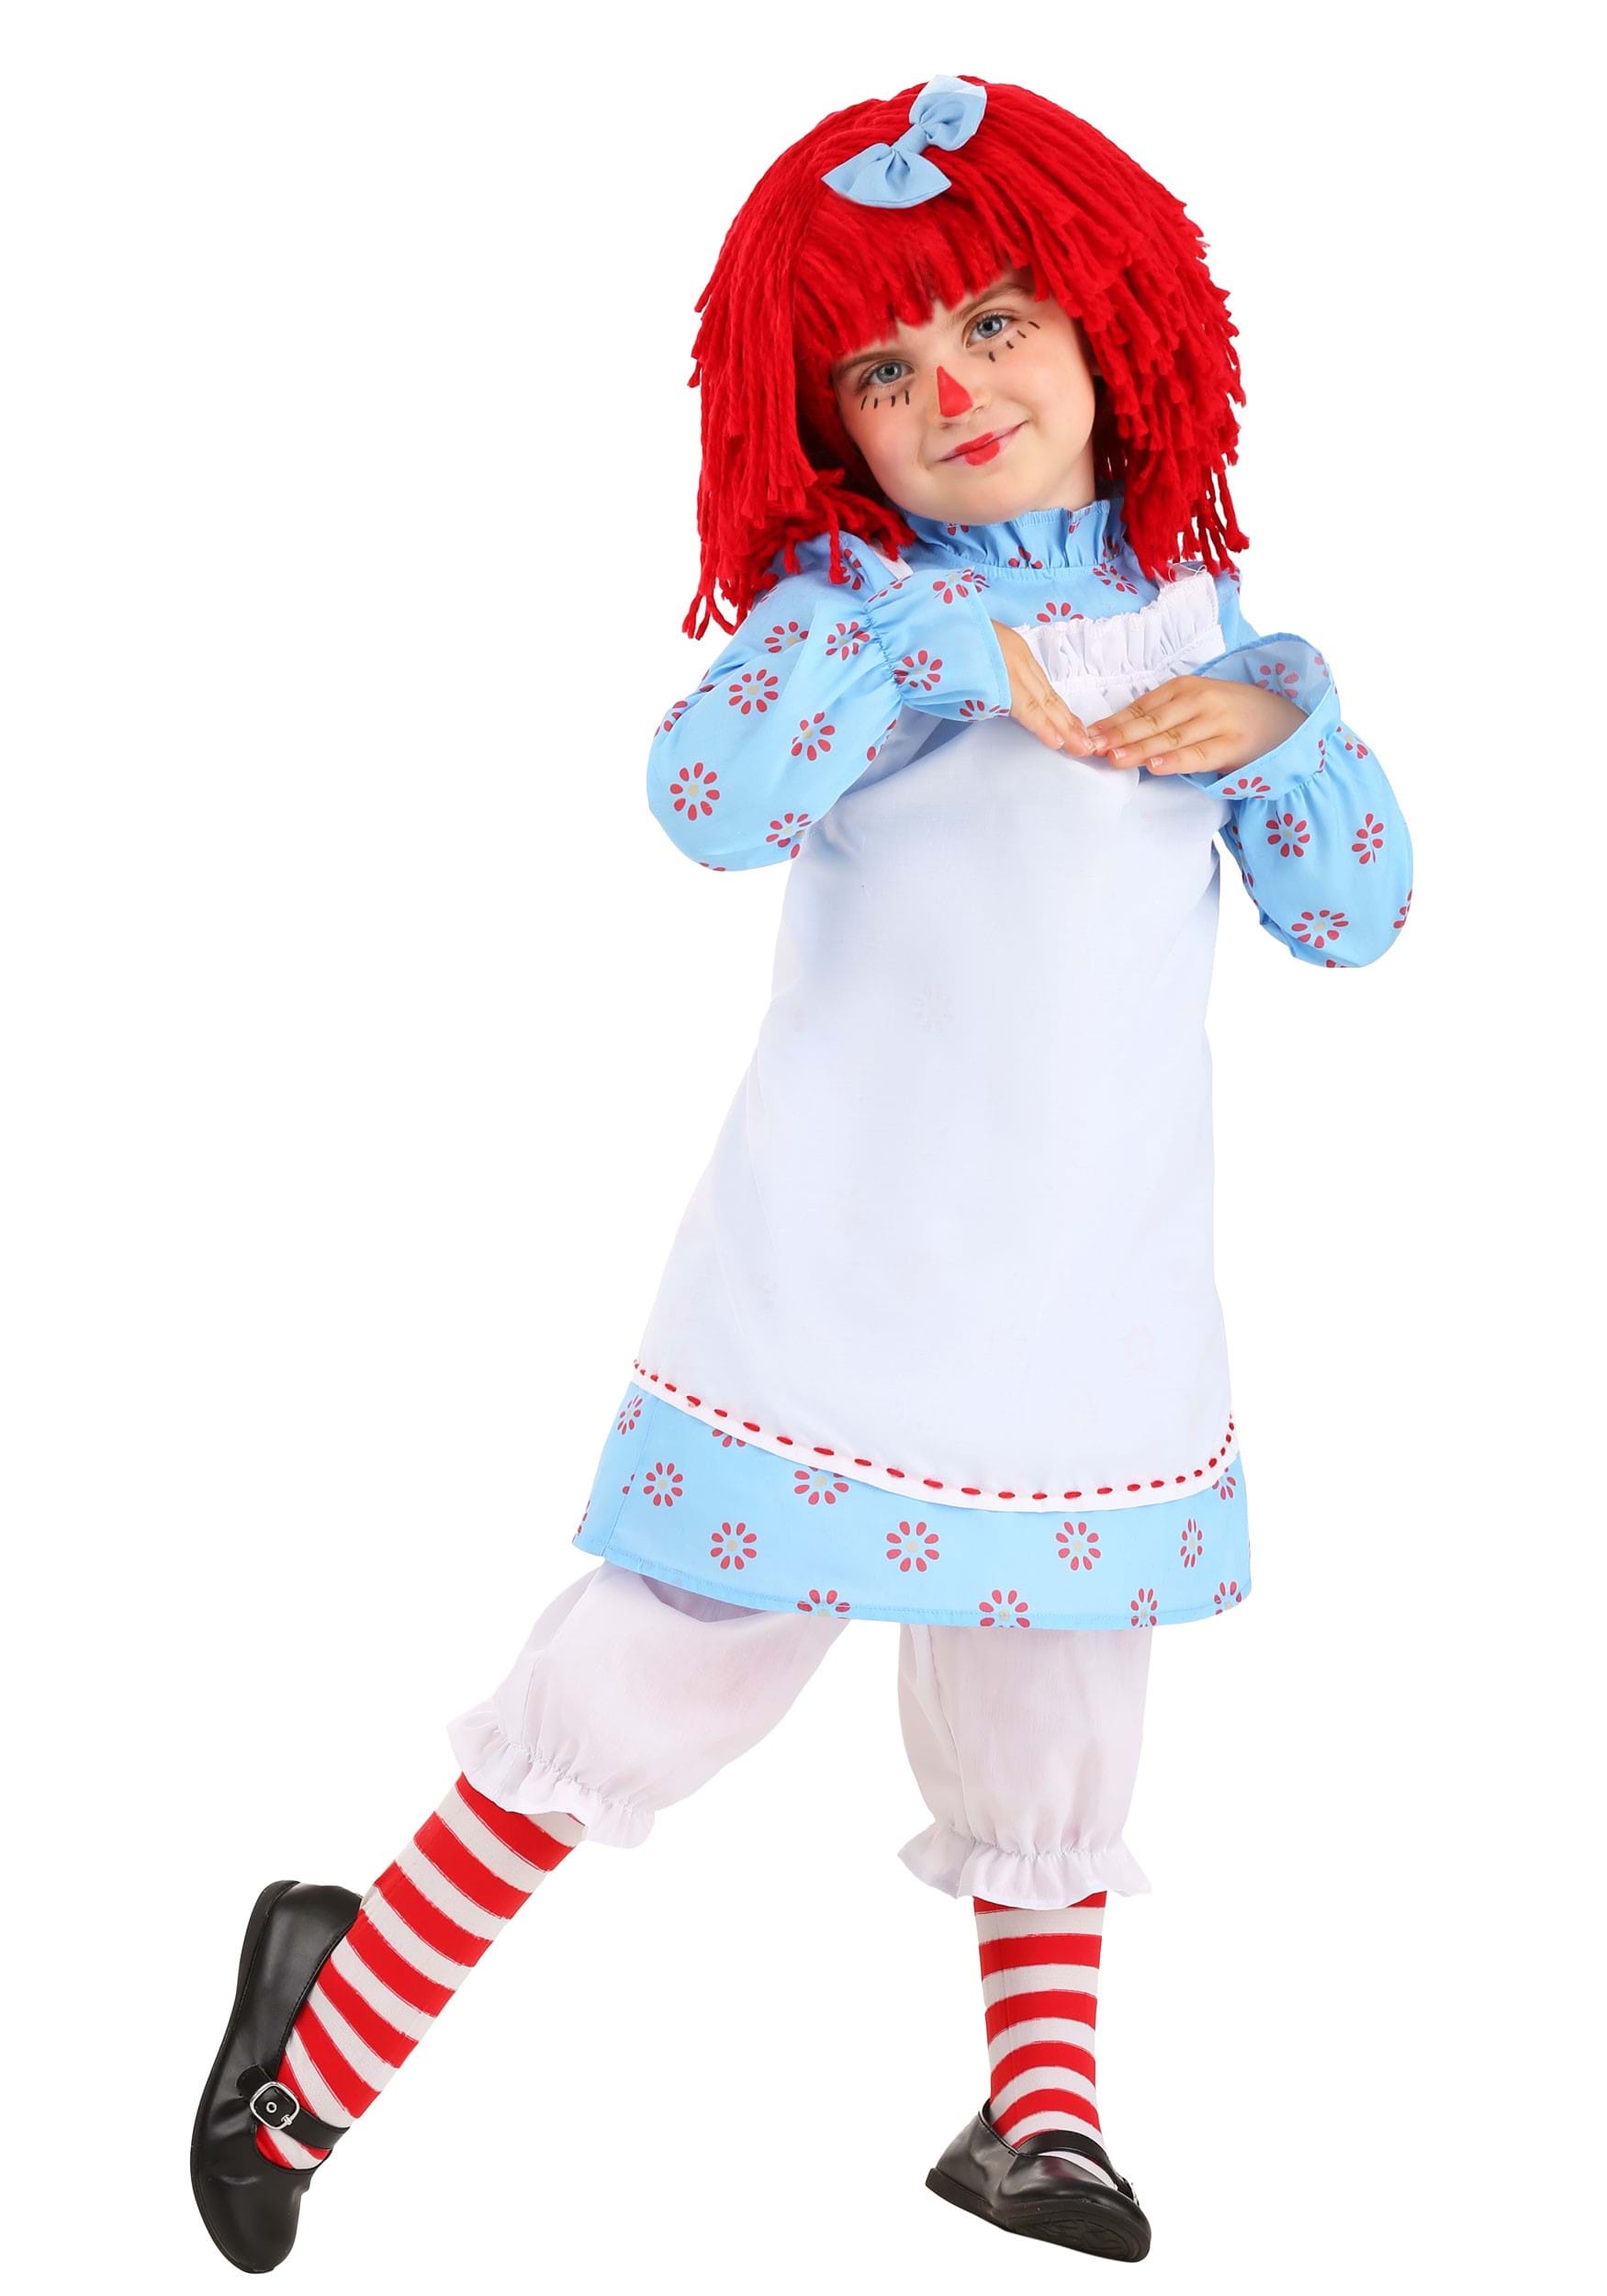 Photos - Fancy Dress FUN Costumes Exclusive Raggedy Ann Costume for Toddler's Red/Blue/